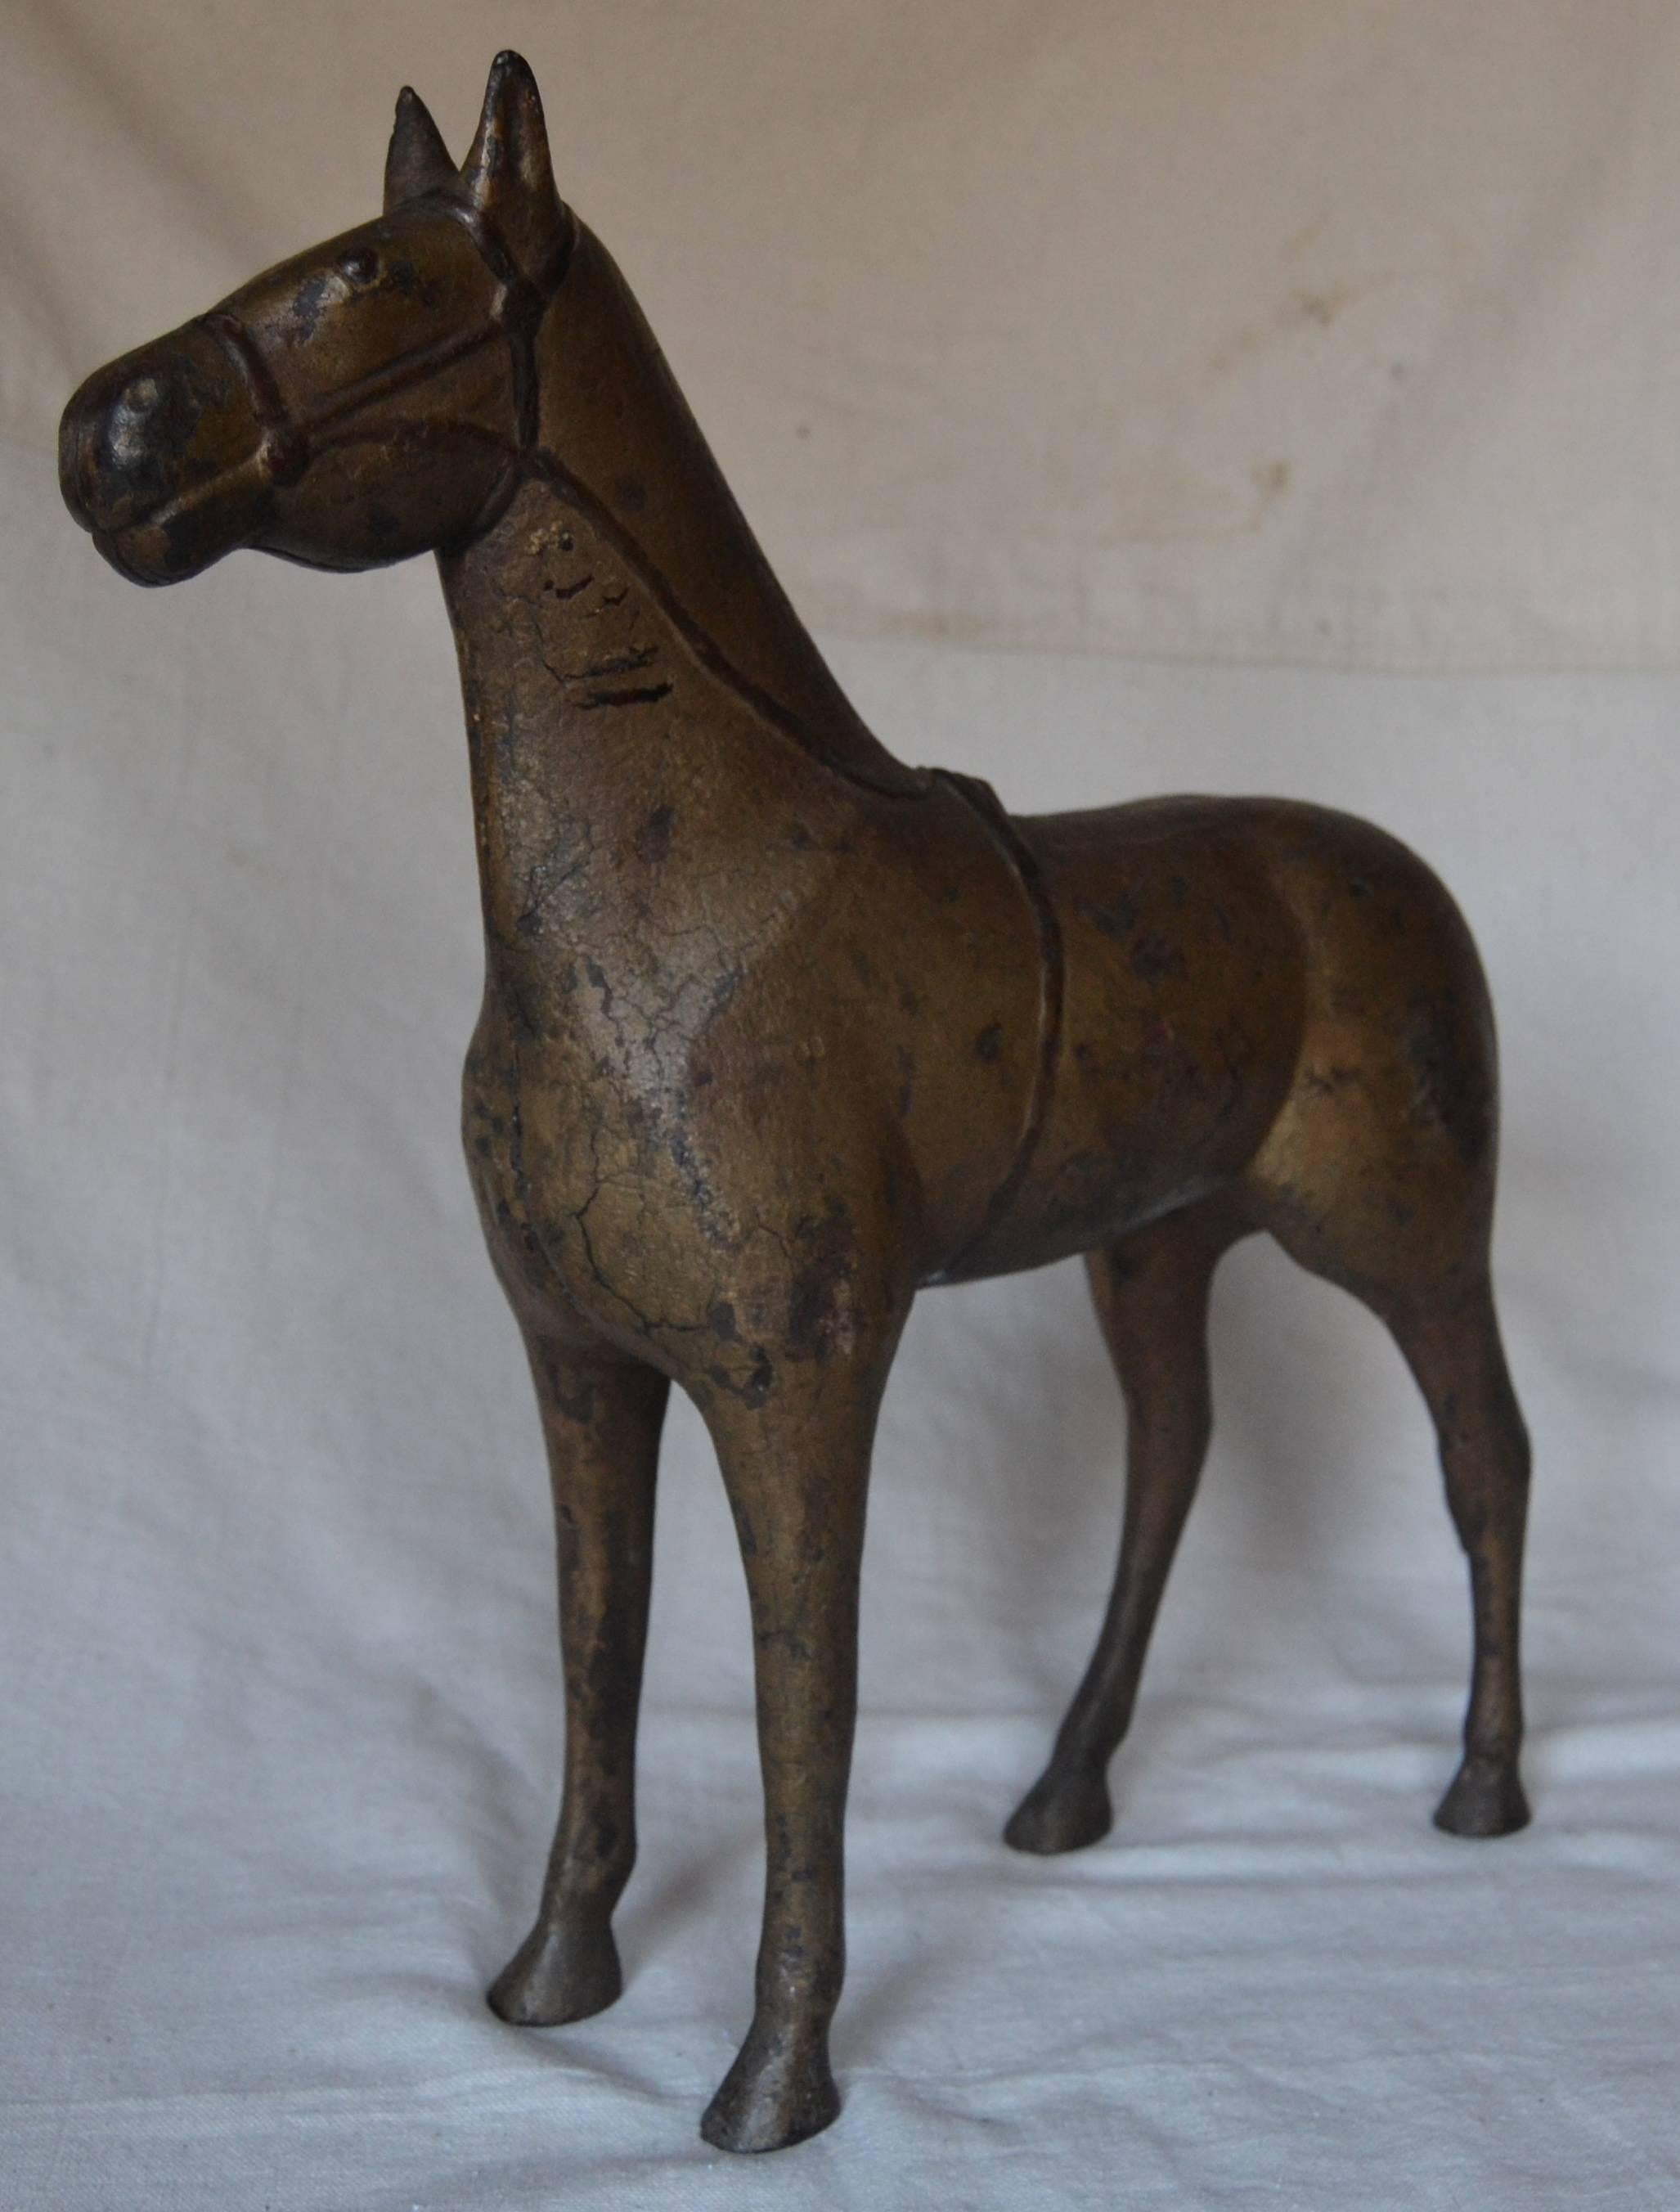 Very good folky cast iron rendition of a standing horse with great details. Whimsically detailed form of the tail with the sharp line of the bridle providing additional visual interest. Old painted surface of tarnished gold with reddish color to the